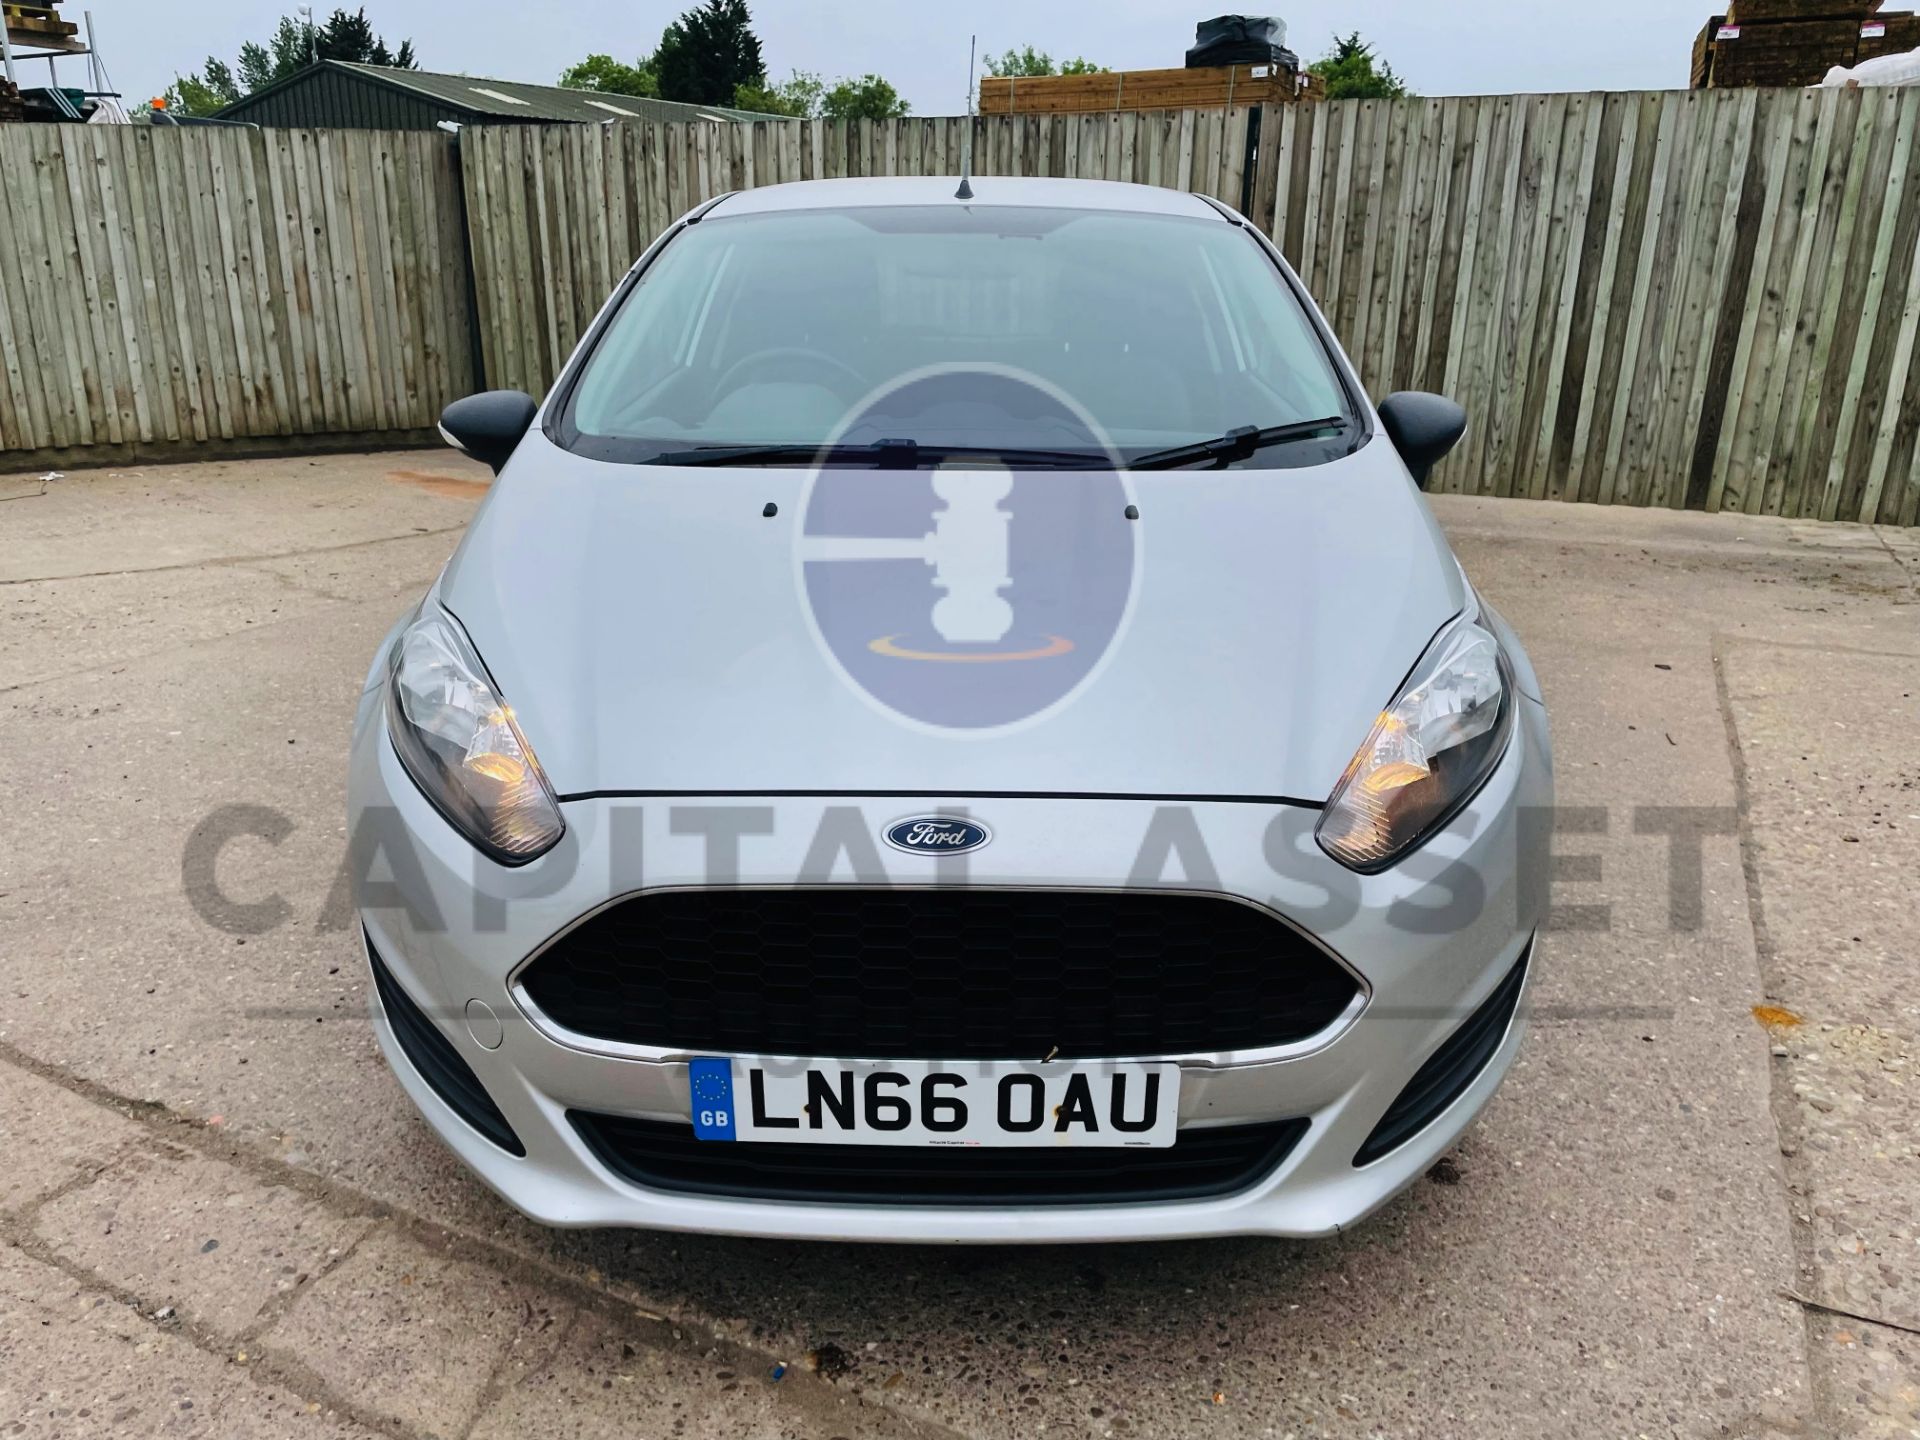 FORD FIESTA *LCV - PANEL VAN* (2017 - EURO 6) 1.5 TDCI - AUTO STOP/START (1 OWNER) *AIR CON* - Image 5 of 38